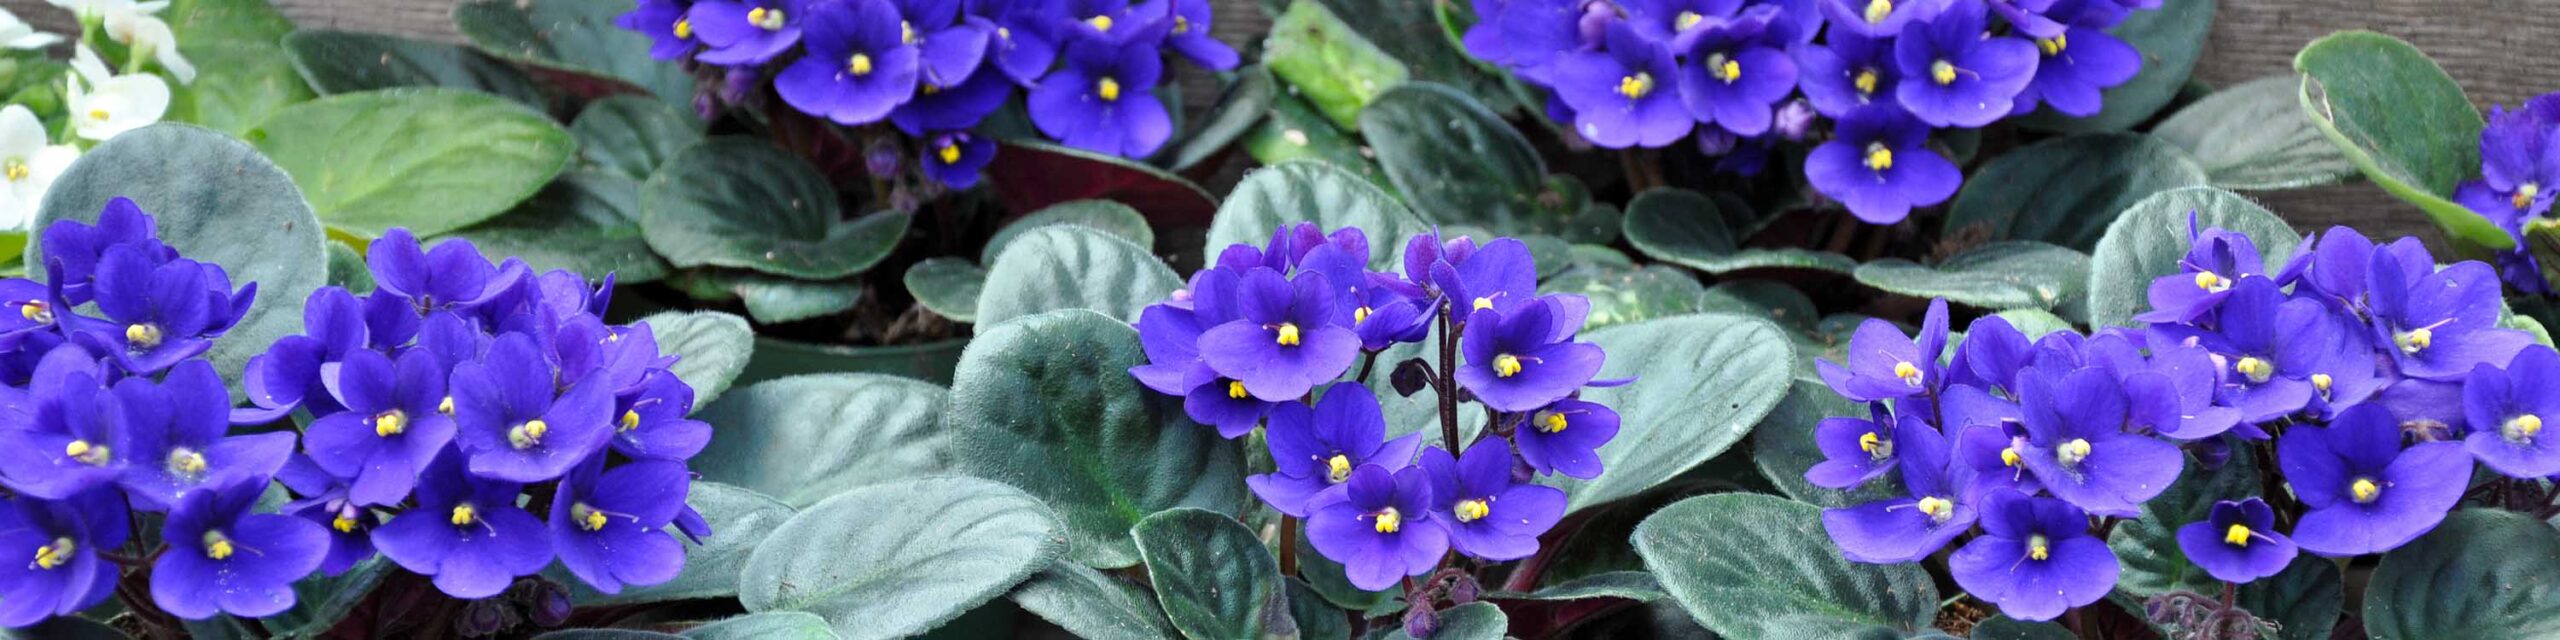 Potted African violets with blue flowers.